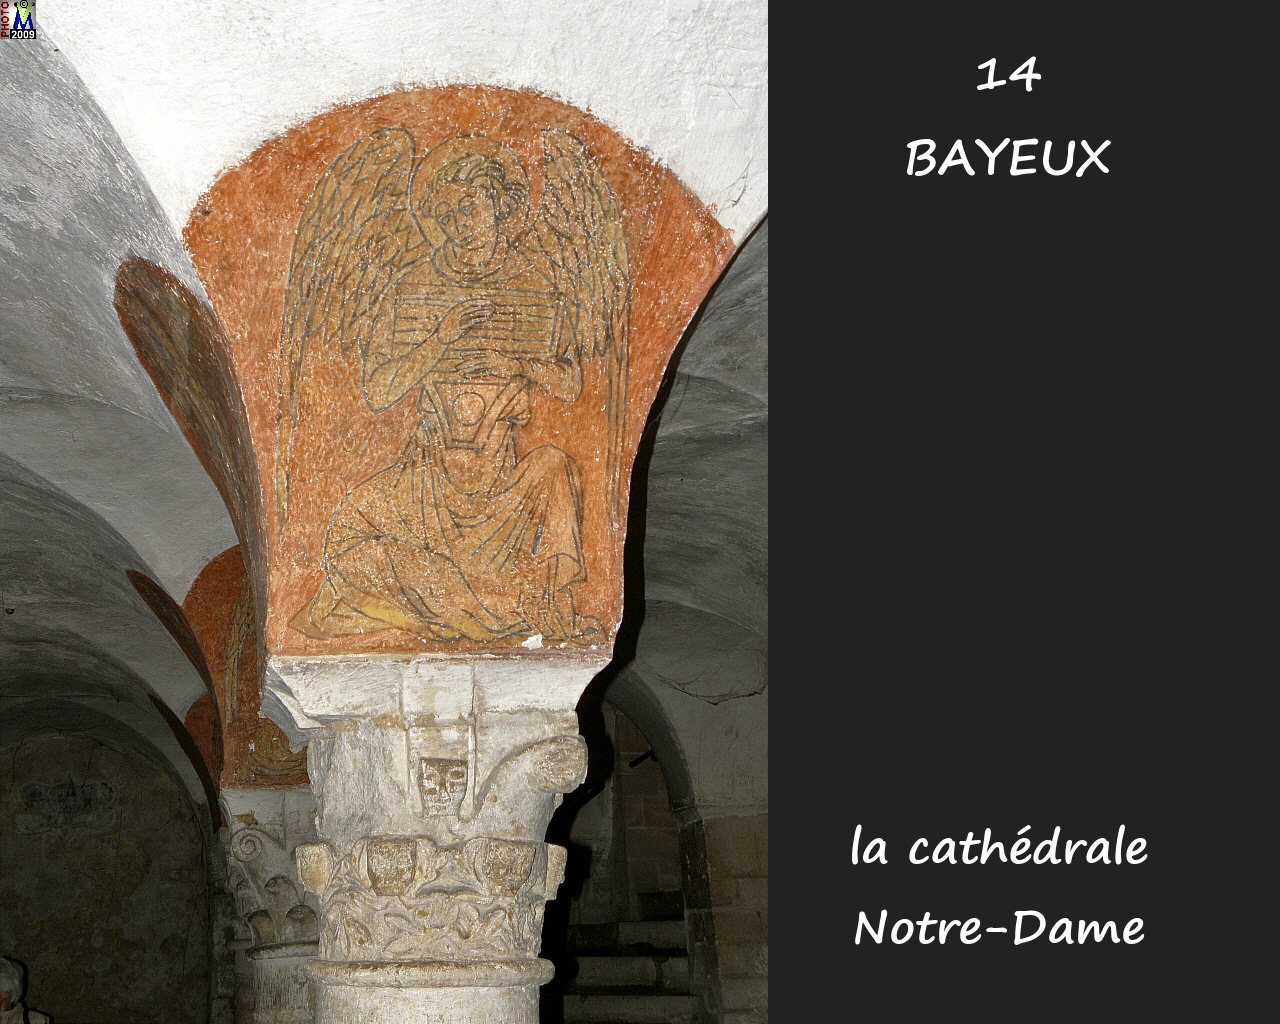 14BAYEUX_cathedrale_312.jpg